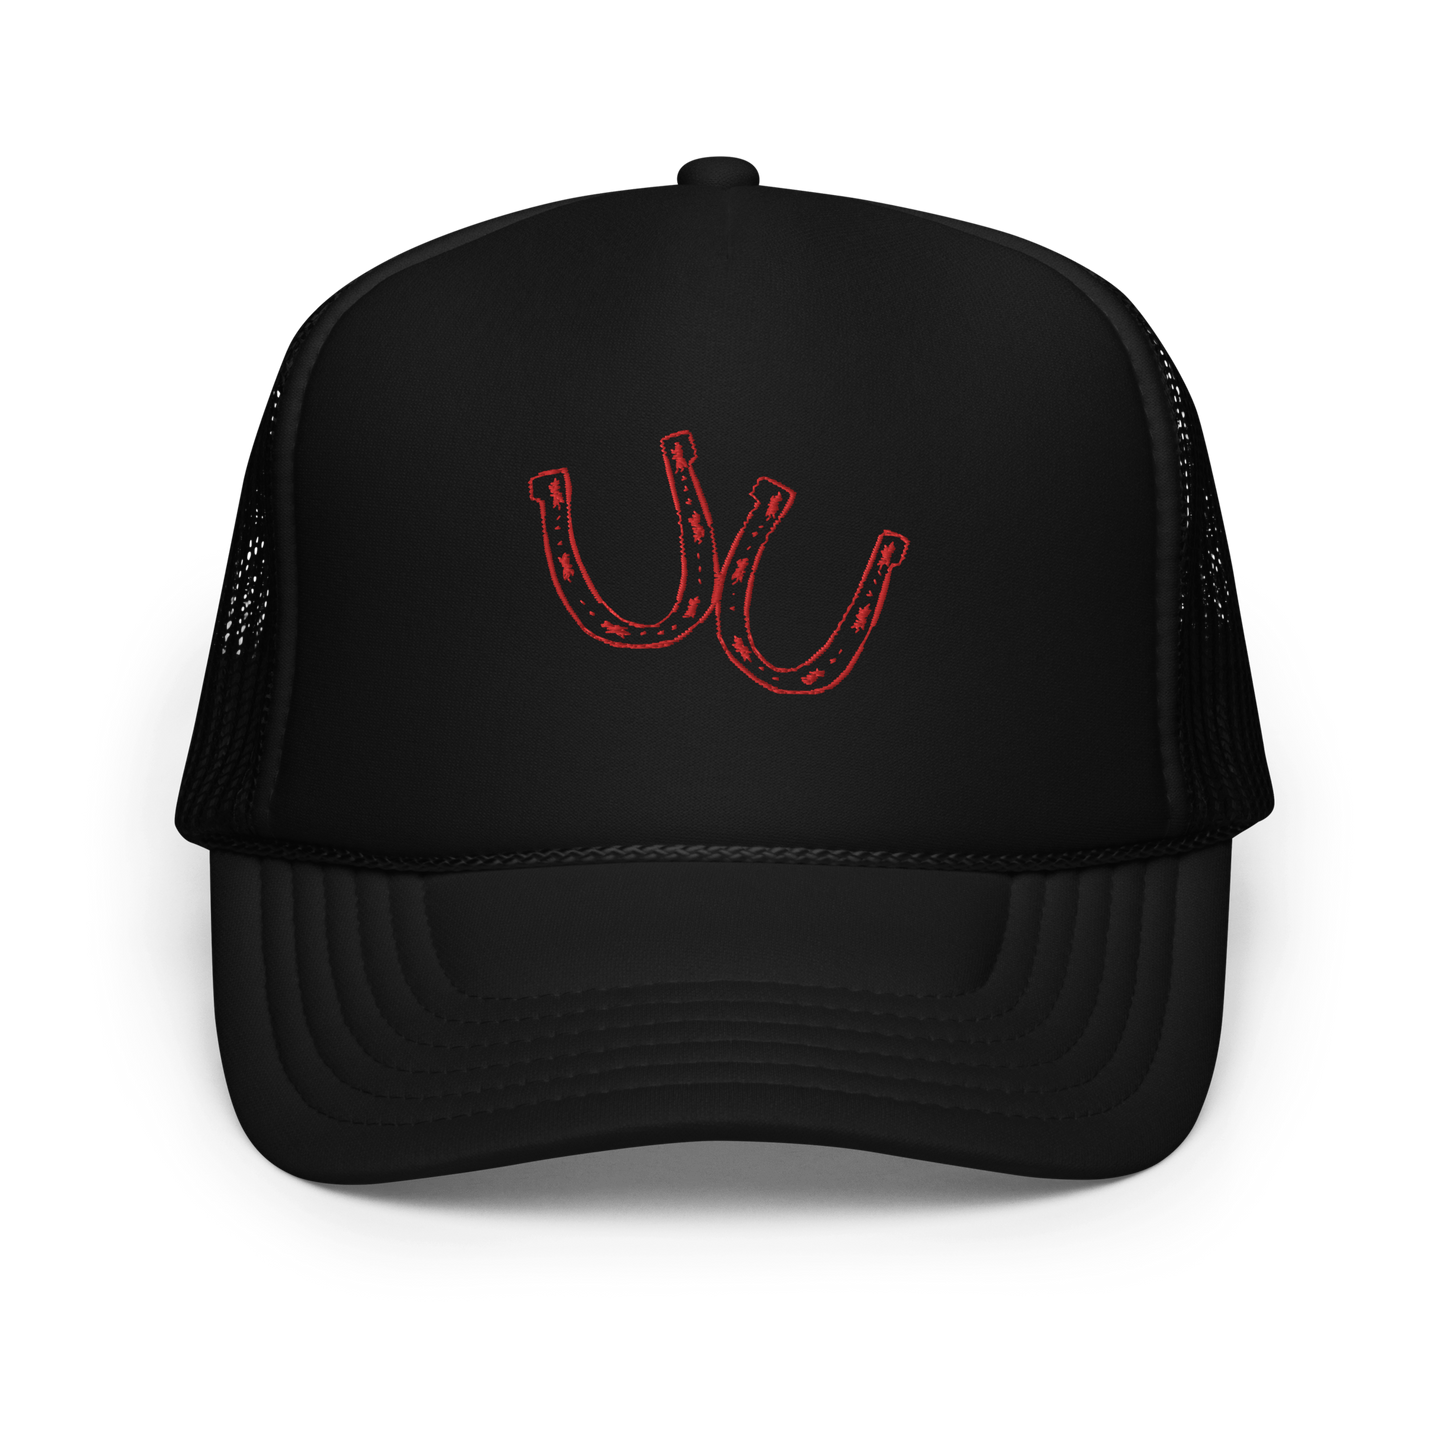 Ol' Horse Shoe Hat - Classic Red Stitching